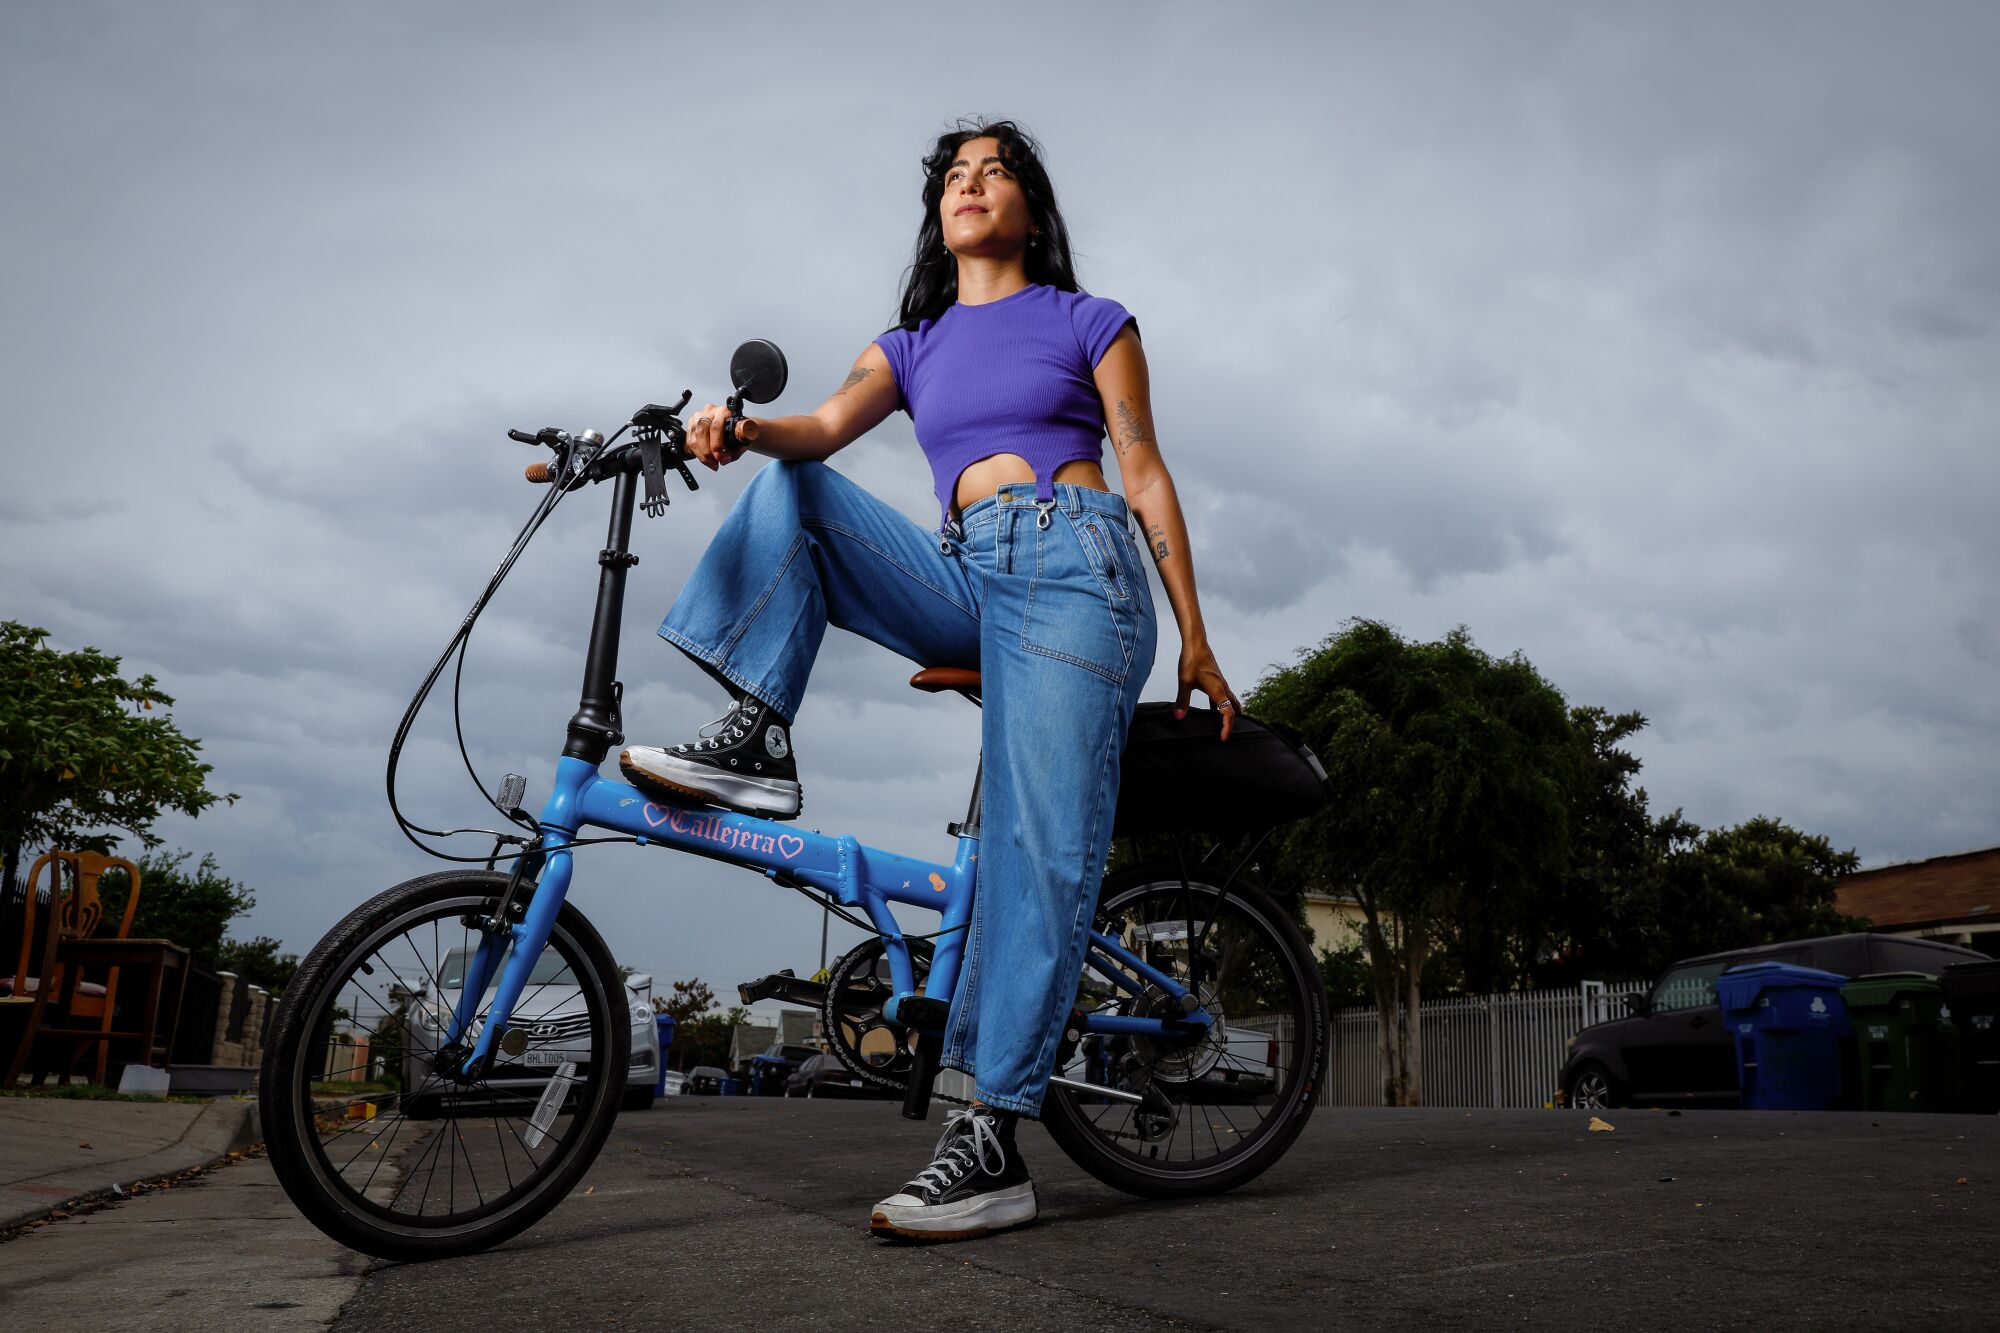 A portrait of Michelle Moro on a neighborhood street with her blue bicycle.